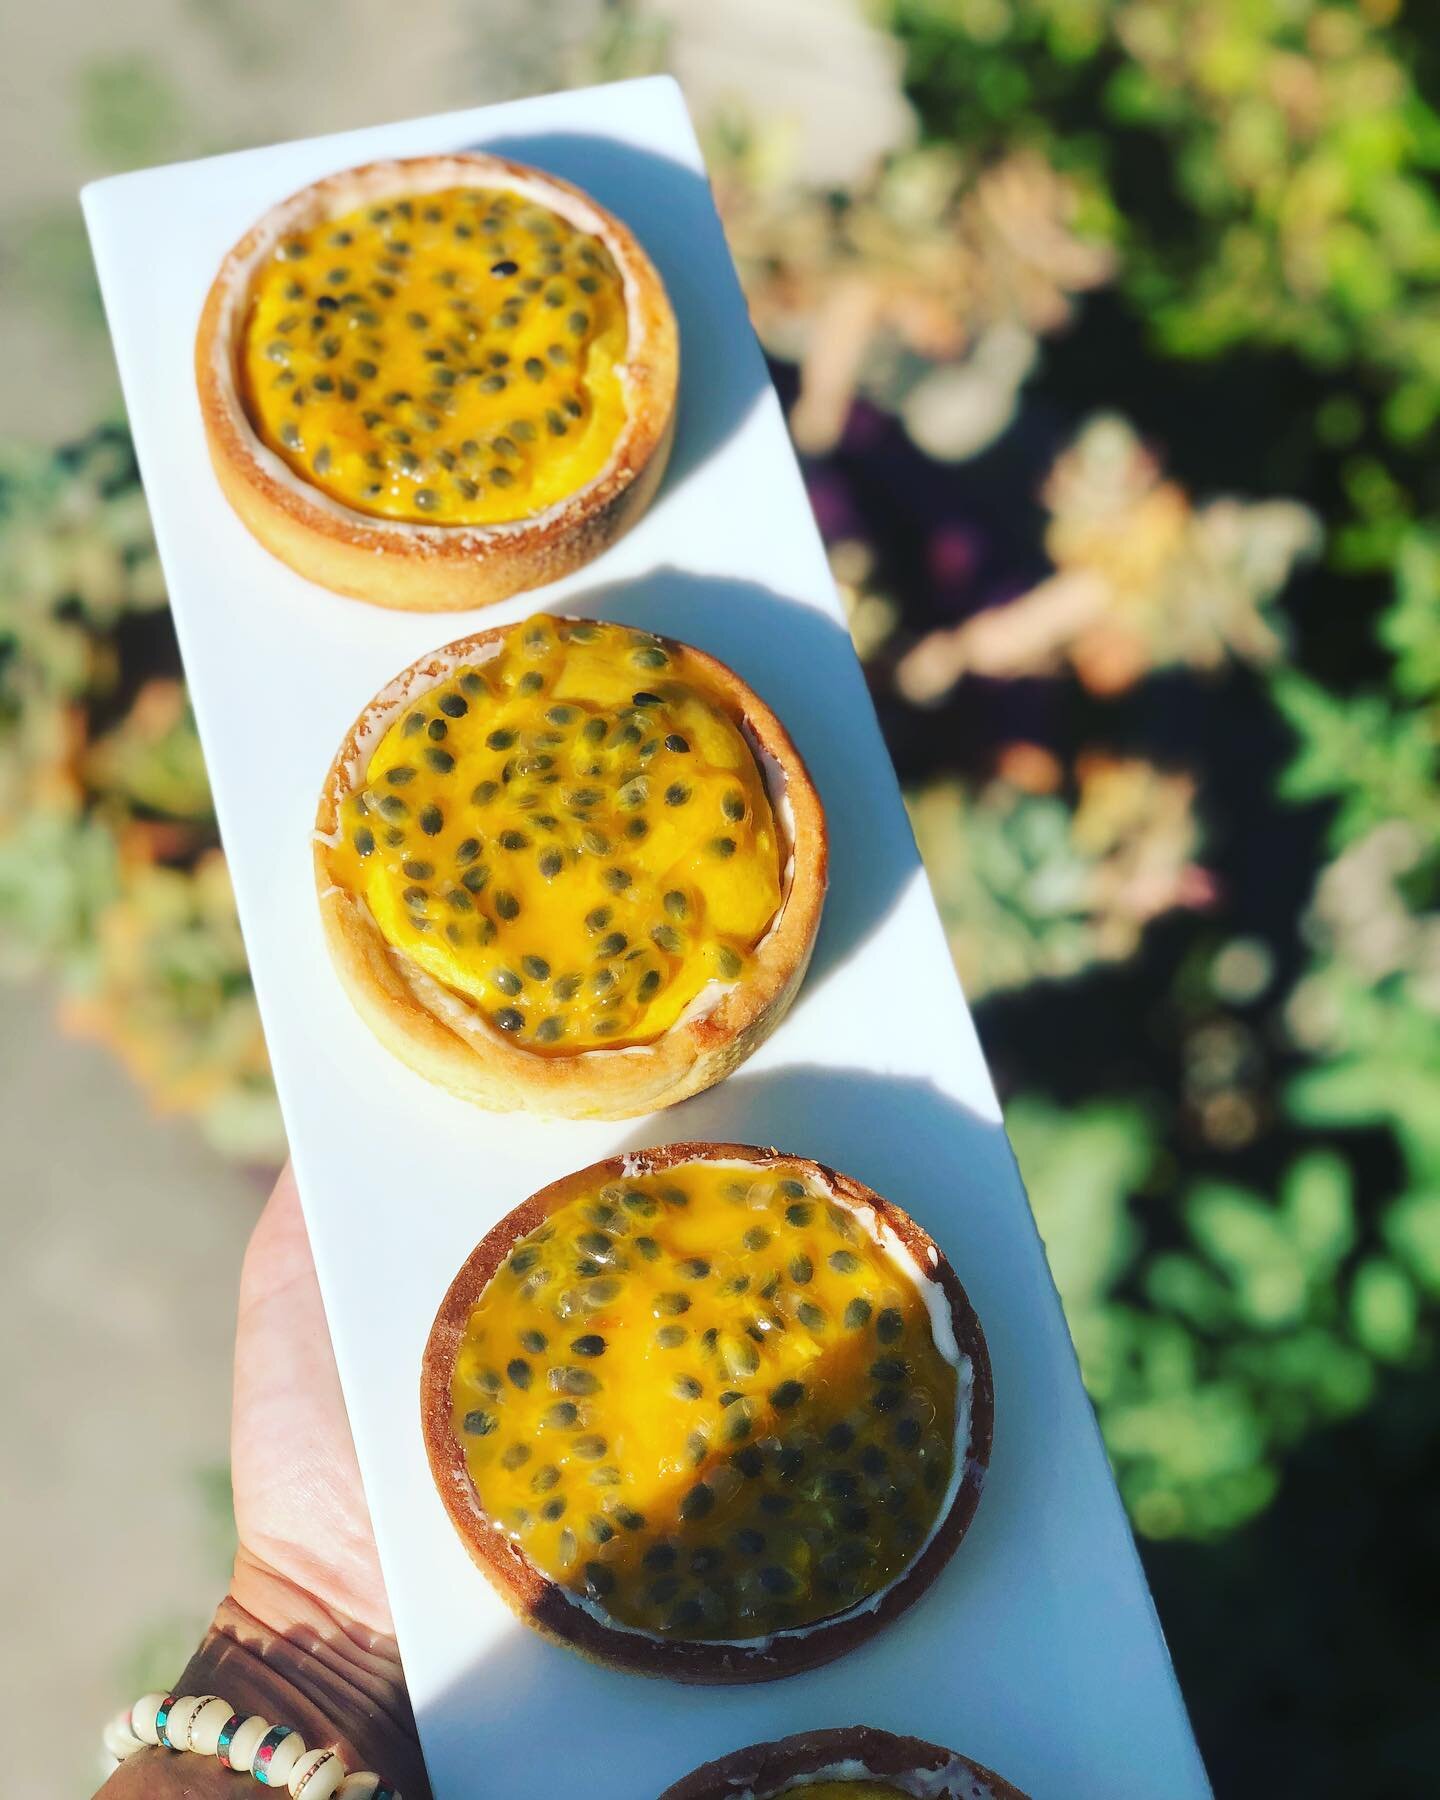 Passion fruits are in season now!

Try our mango/passion fruit tart.

#passionfruit #tart #french #frenchbakery #carlsbad #encinitas